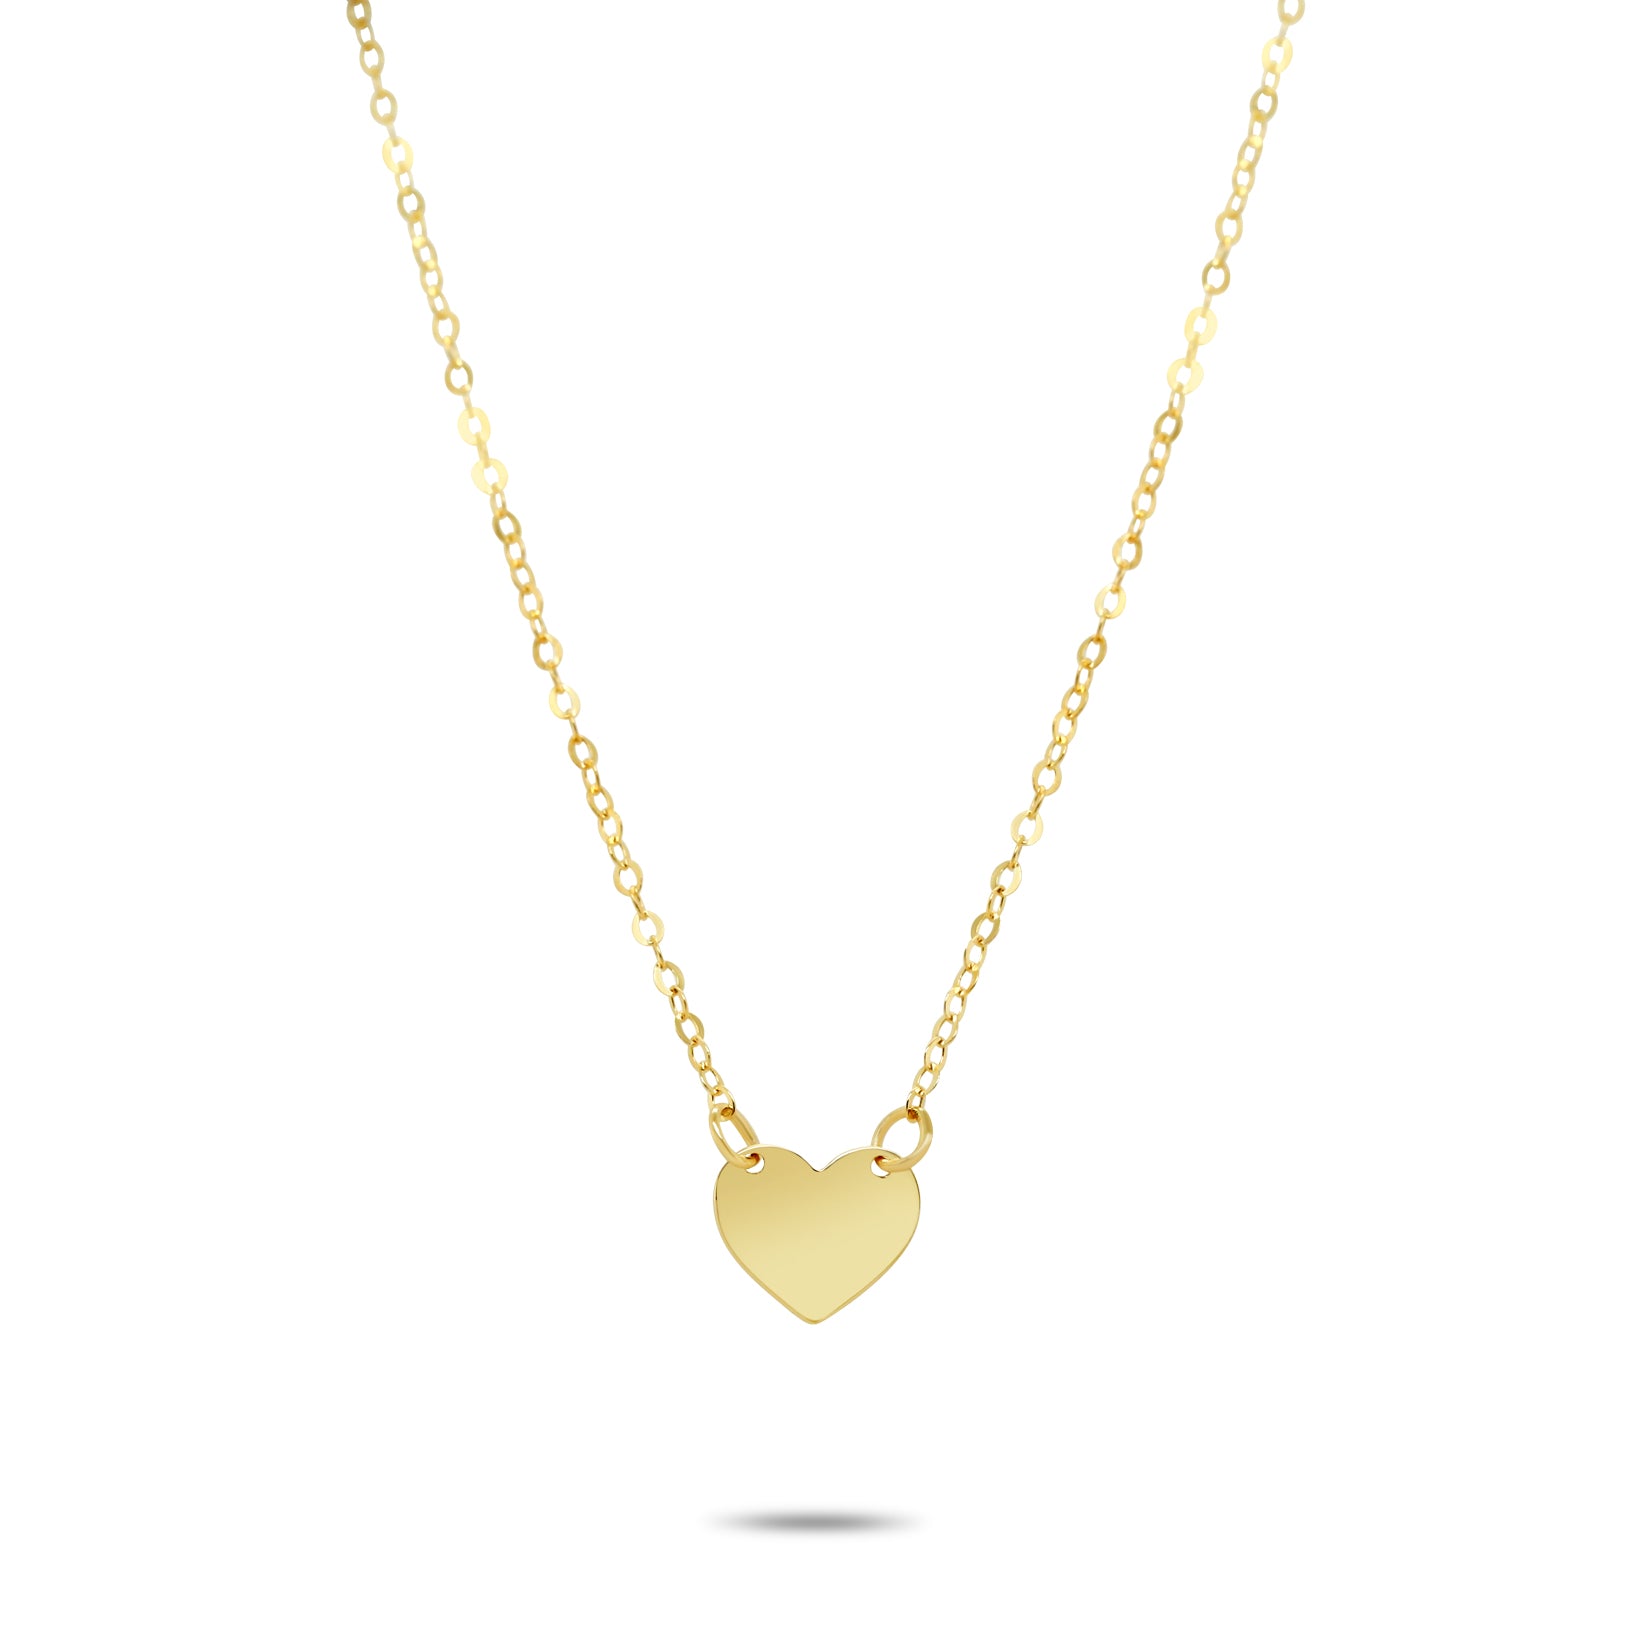 16 inch 14k yellow gold personalized heart charm necklace